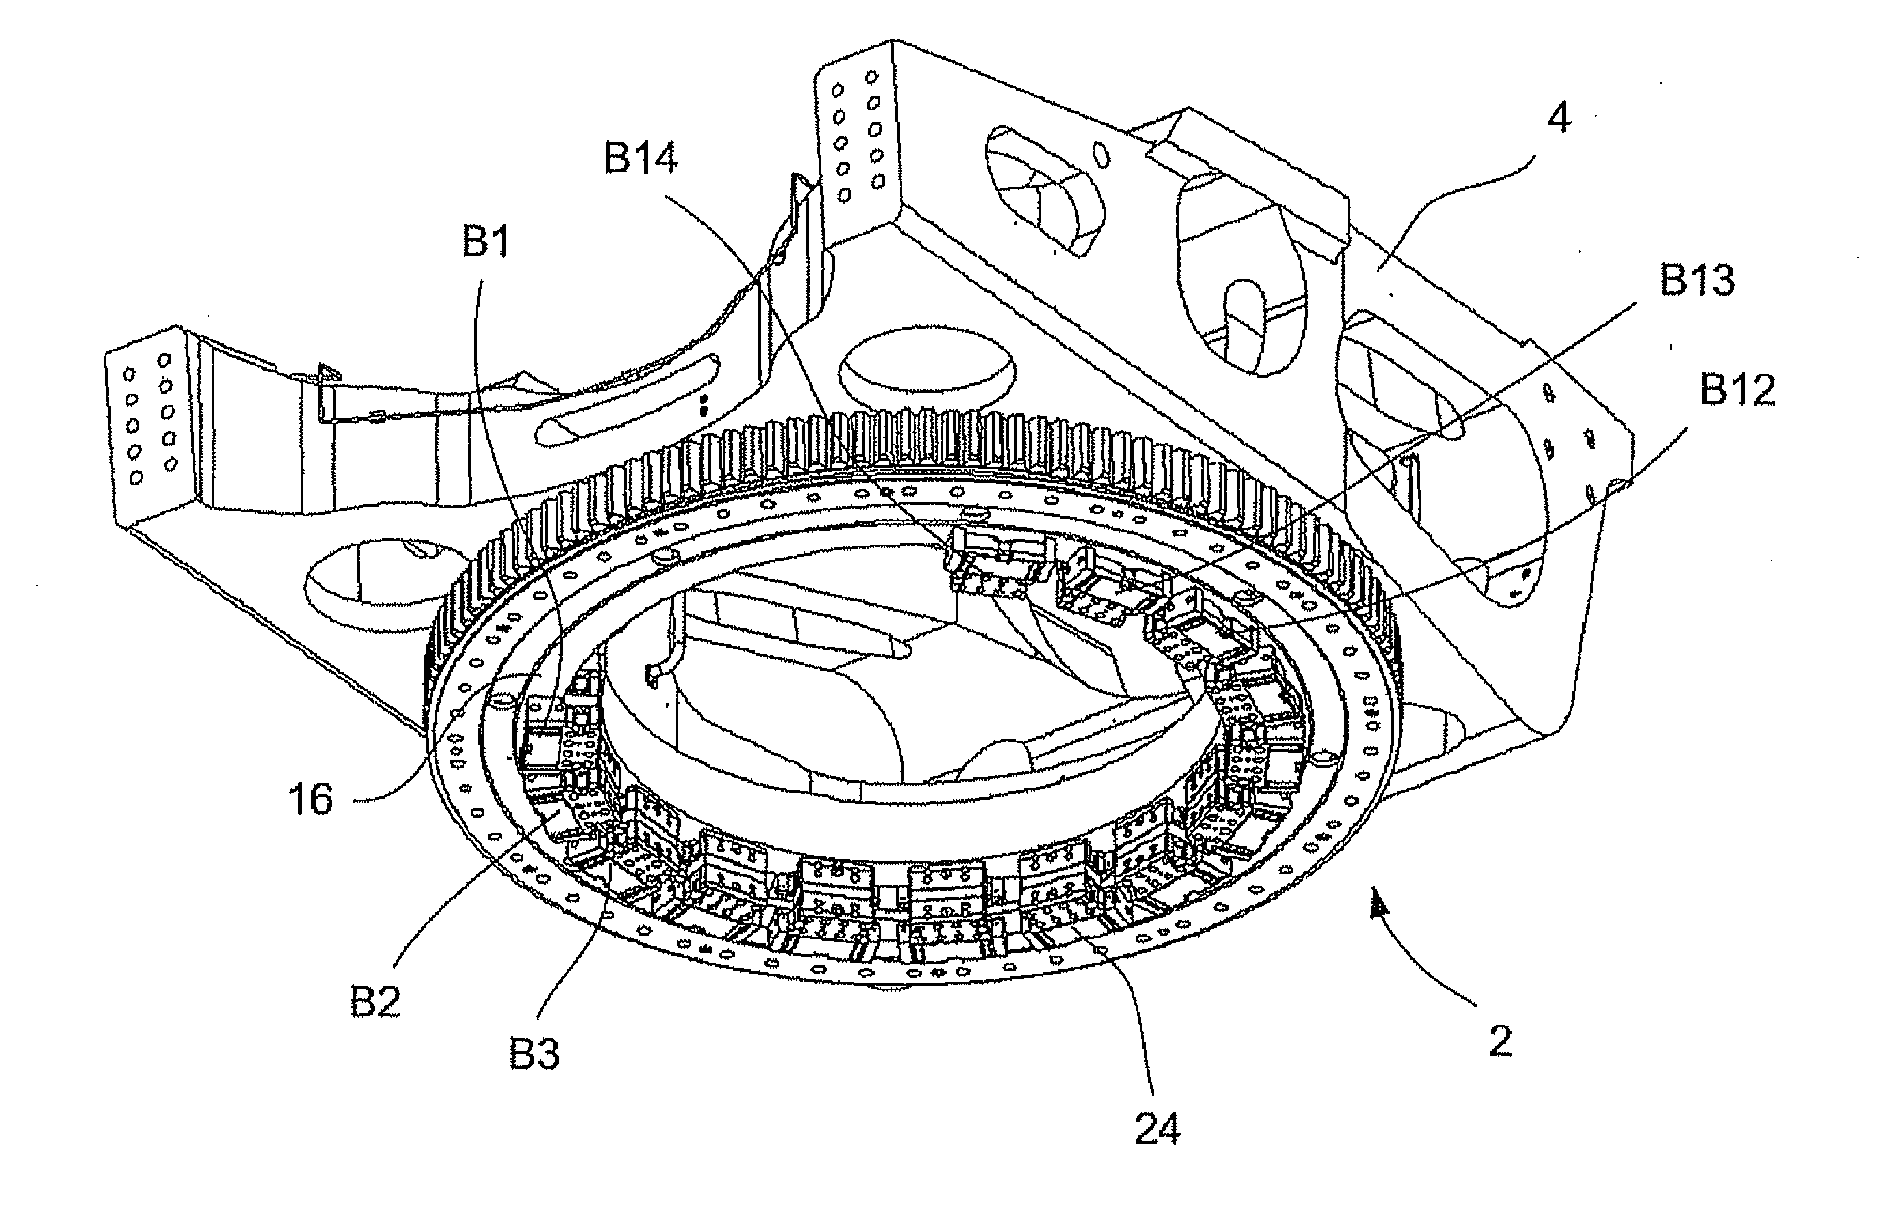 Wind turbine with a yaw system and method for the yaw adjustment of a wind turbine